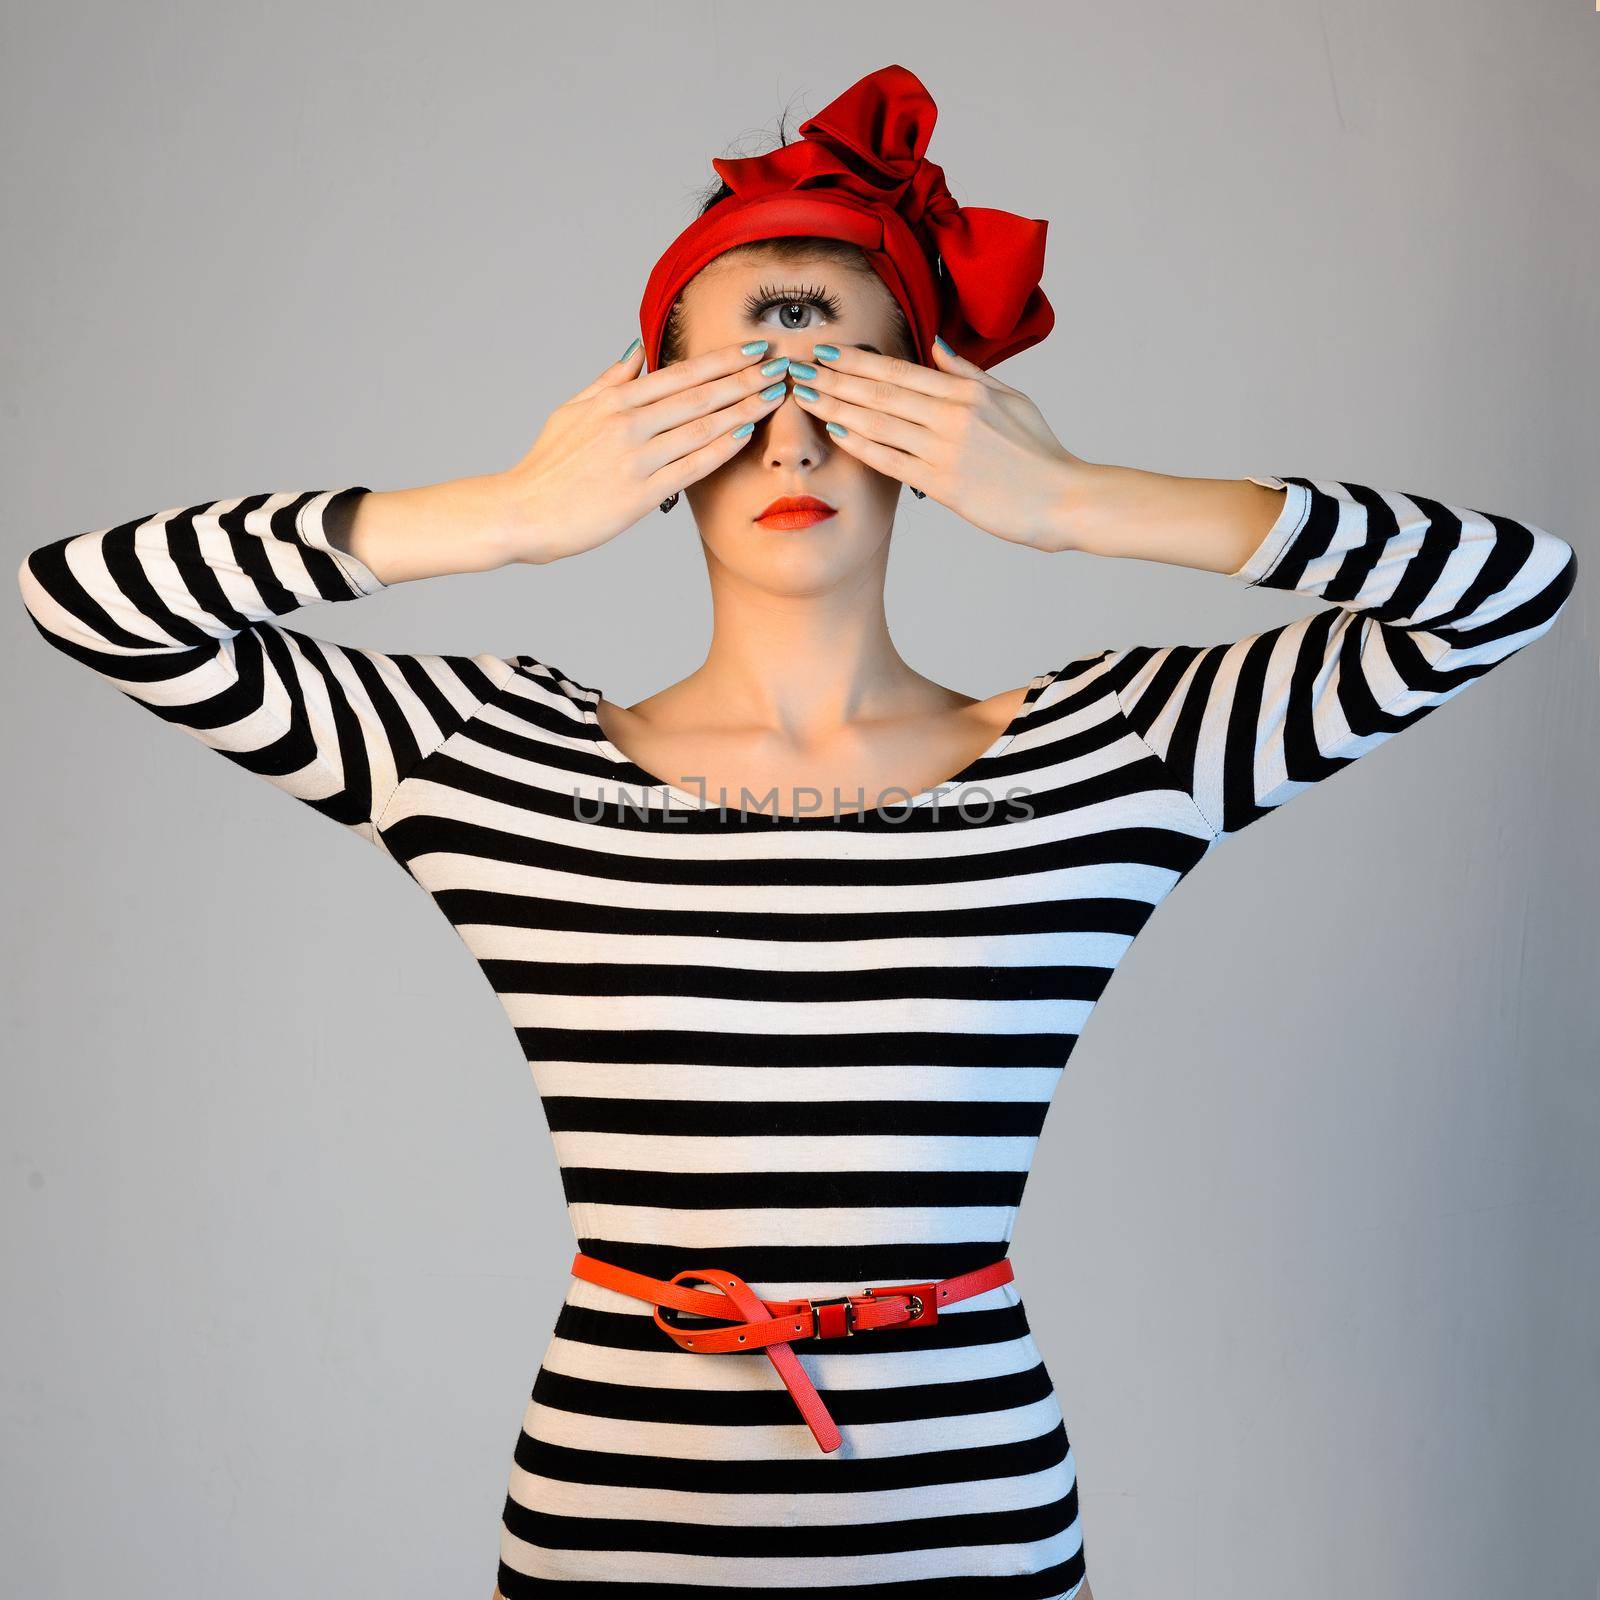 Beautiful girl in a striped dress and a red turban on her head is covering his eyes with hands and looks esoteric third eye on her forehead.